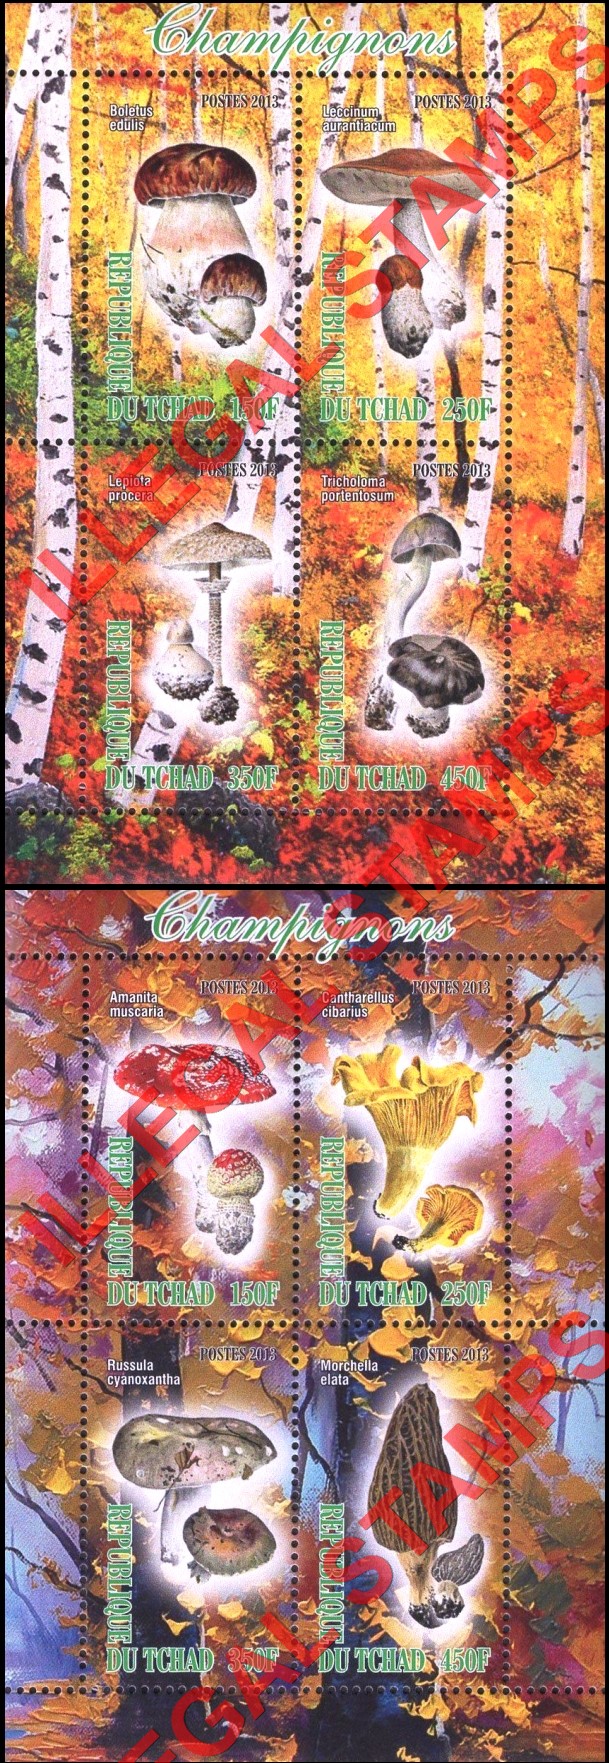 Chad 2013 Mushrooms Illegal Stamps in Souvenir Sheets of 4 (Part 1)